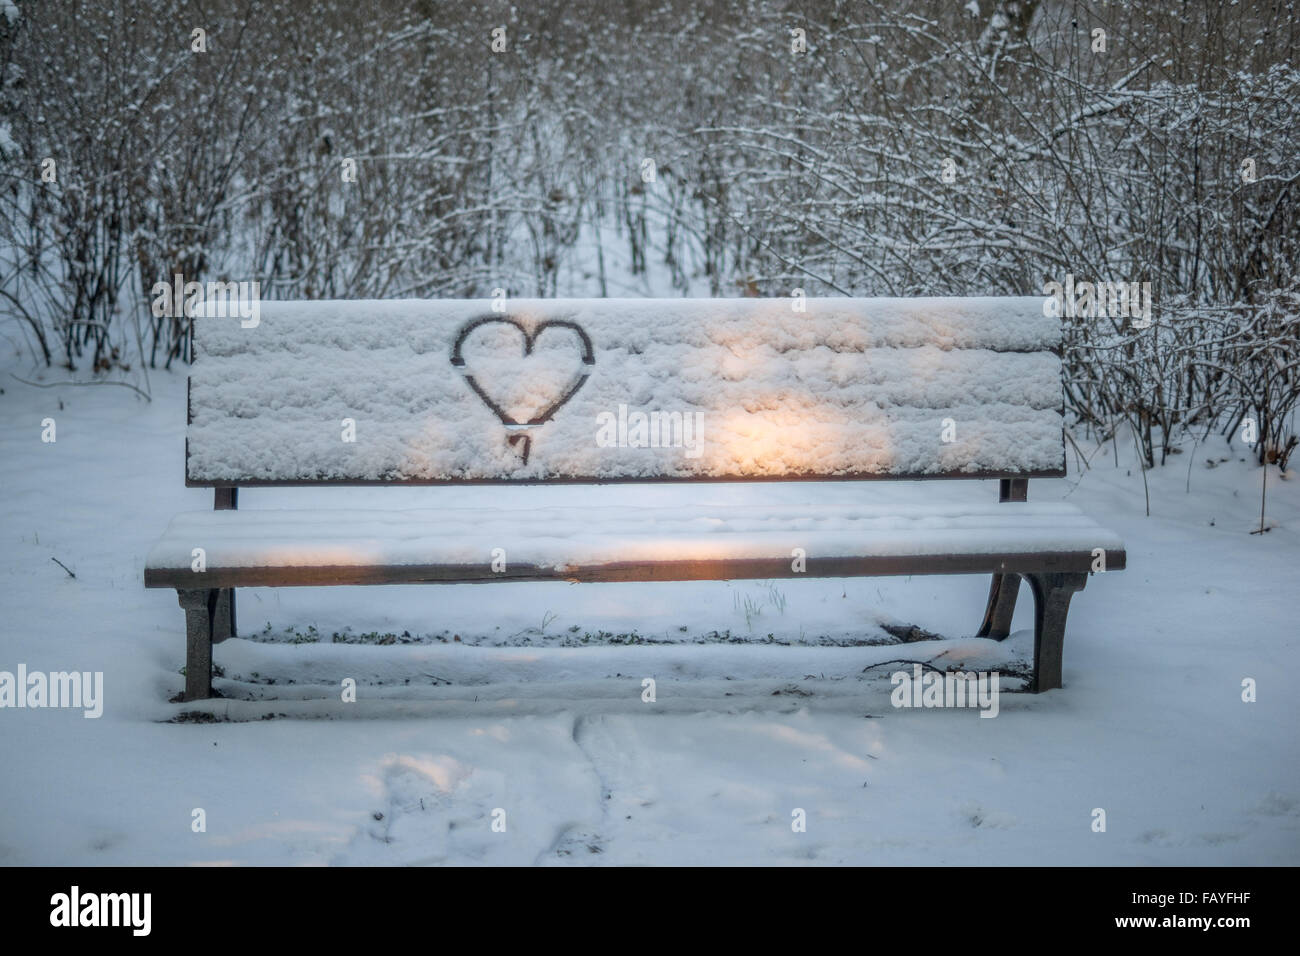 Snow-covered bench with a heart drawn on the back Stock Photo